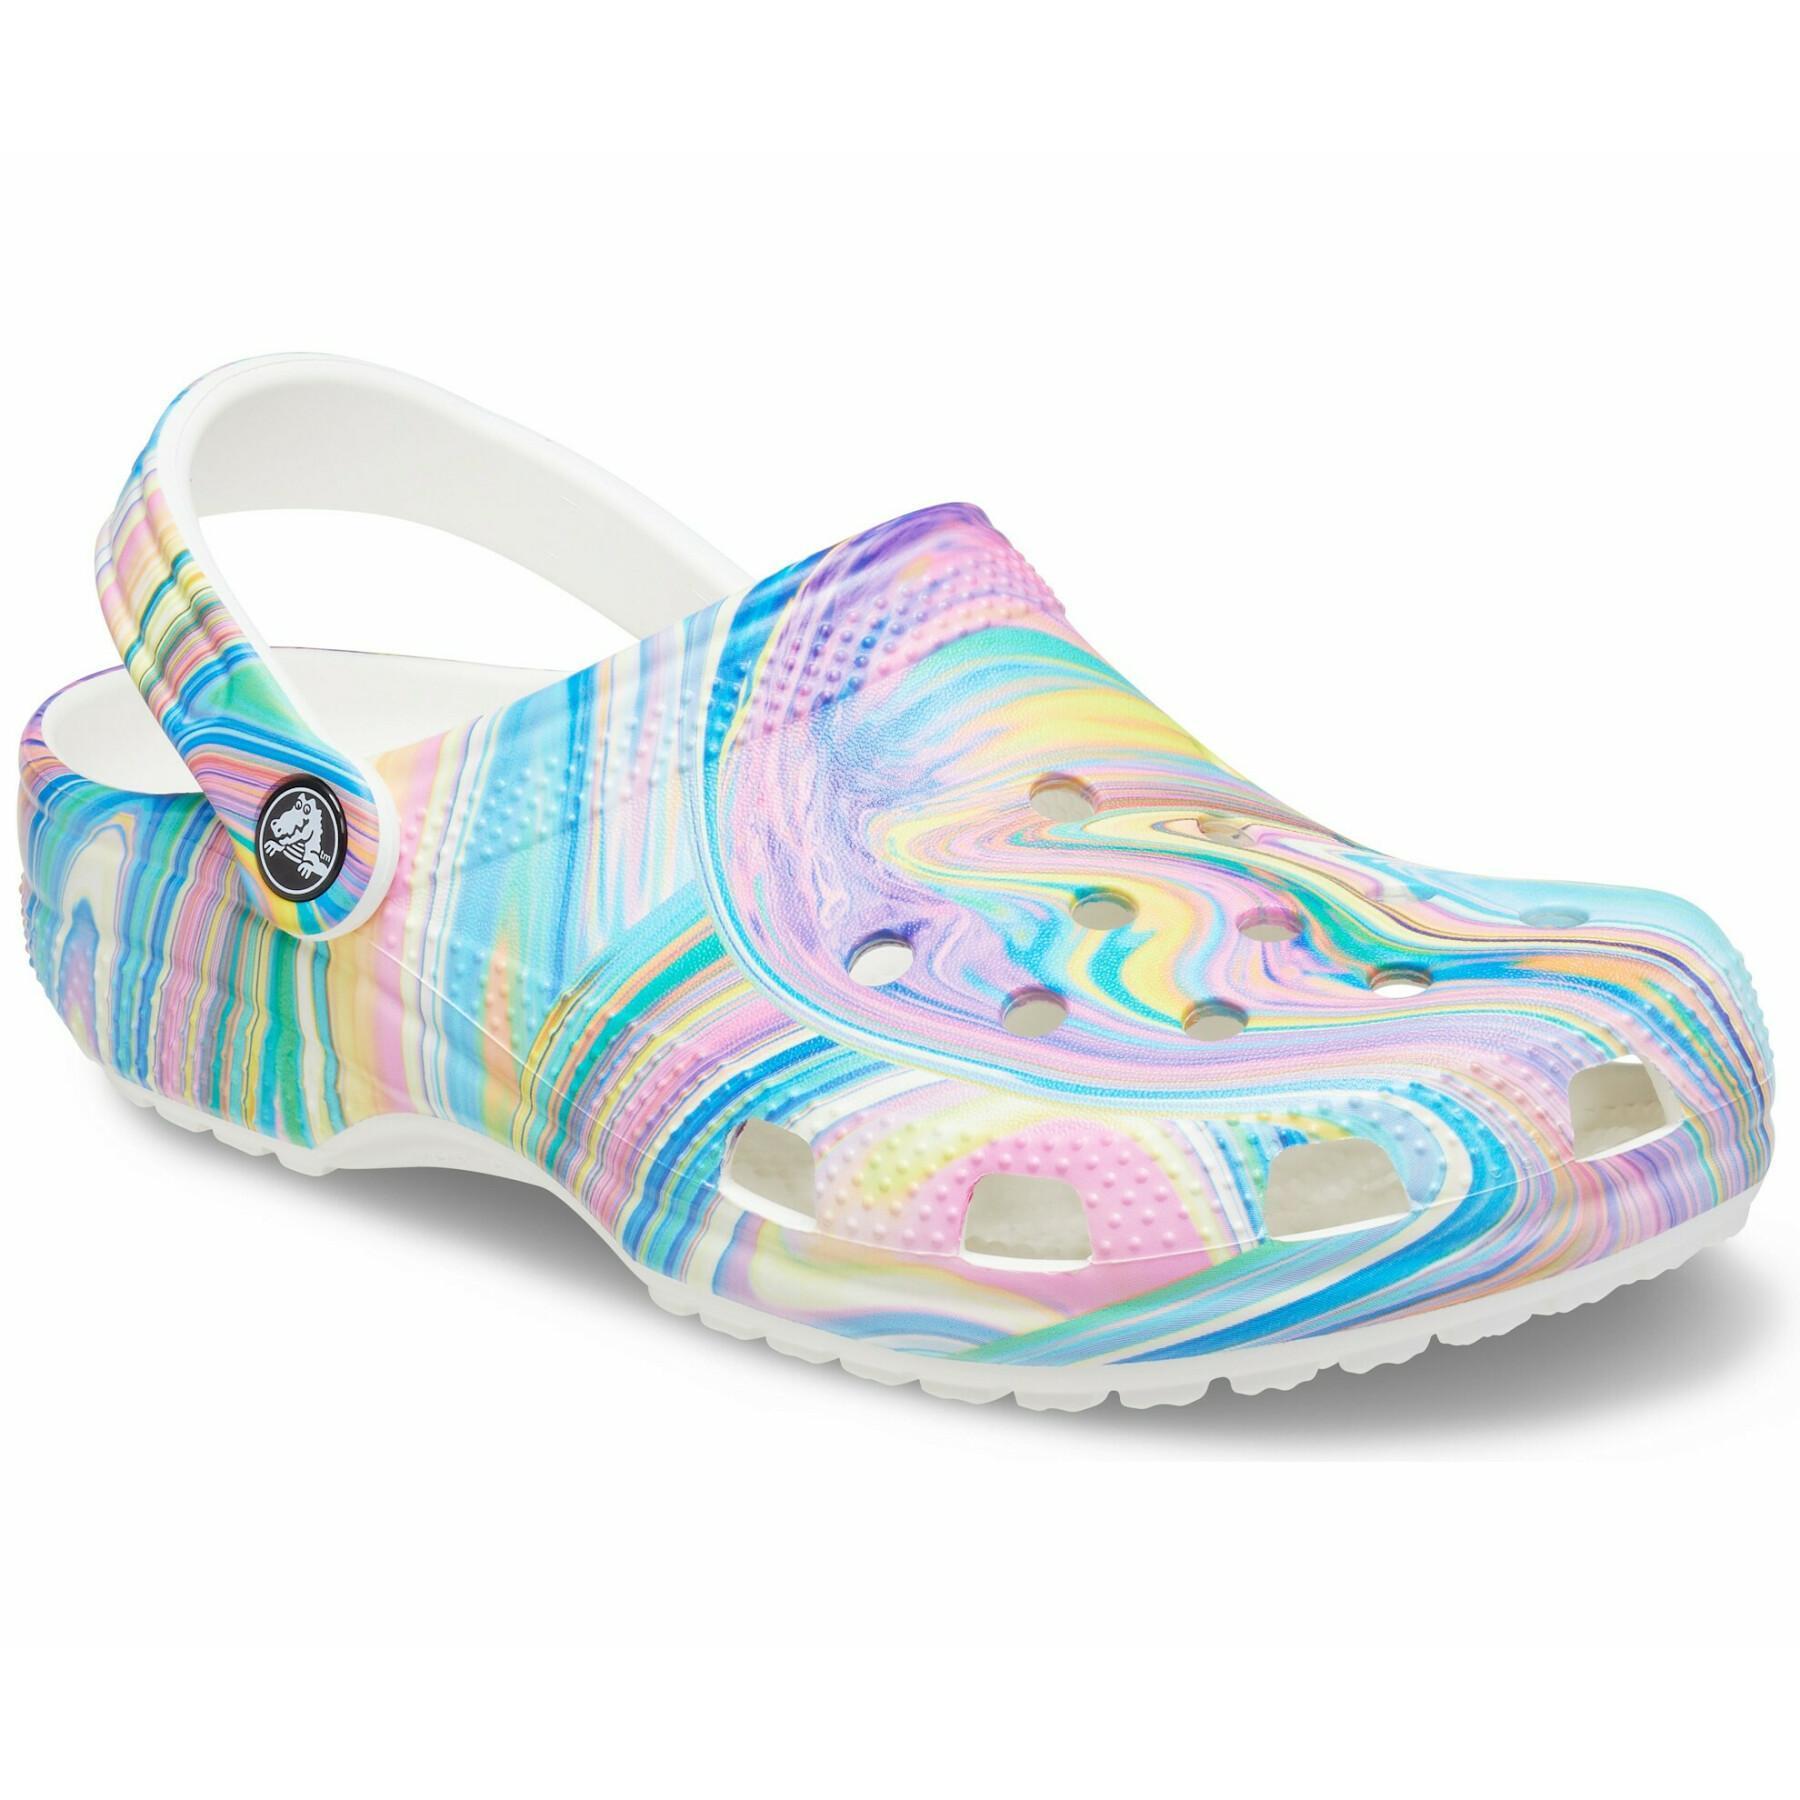 Crocs Classic Out of this World II Cg